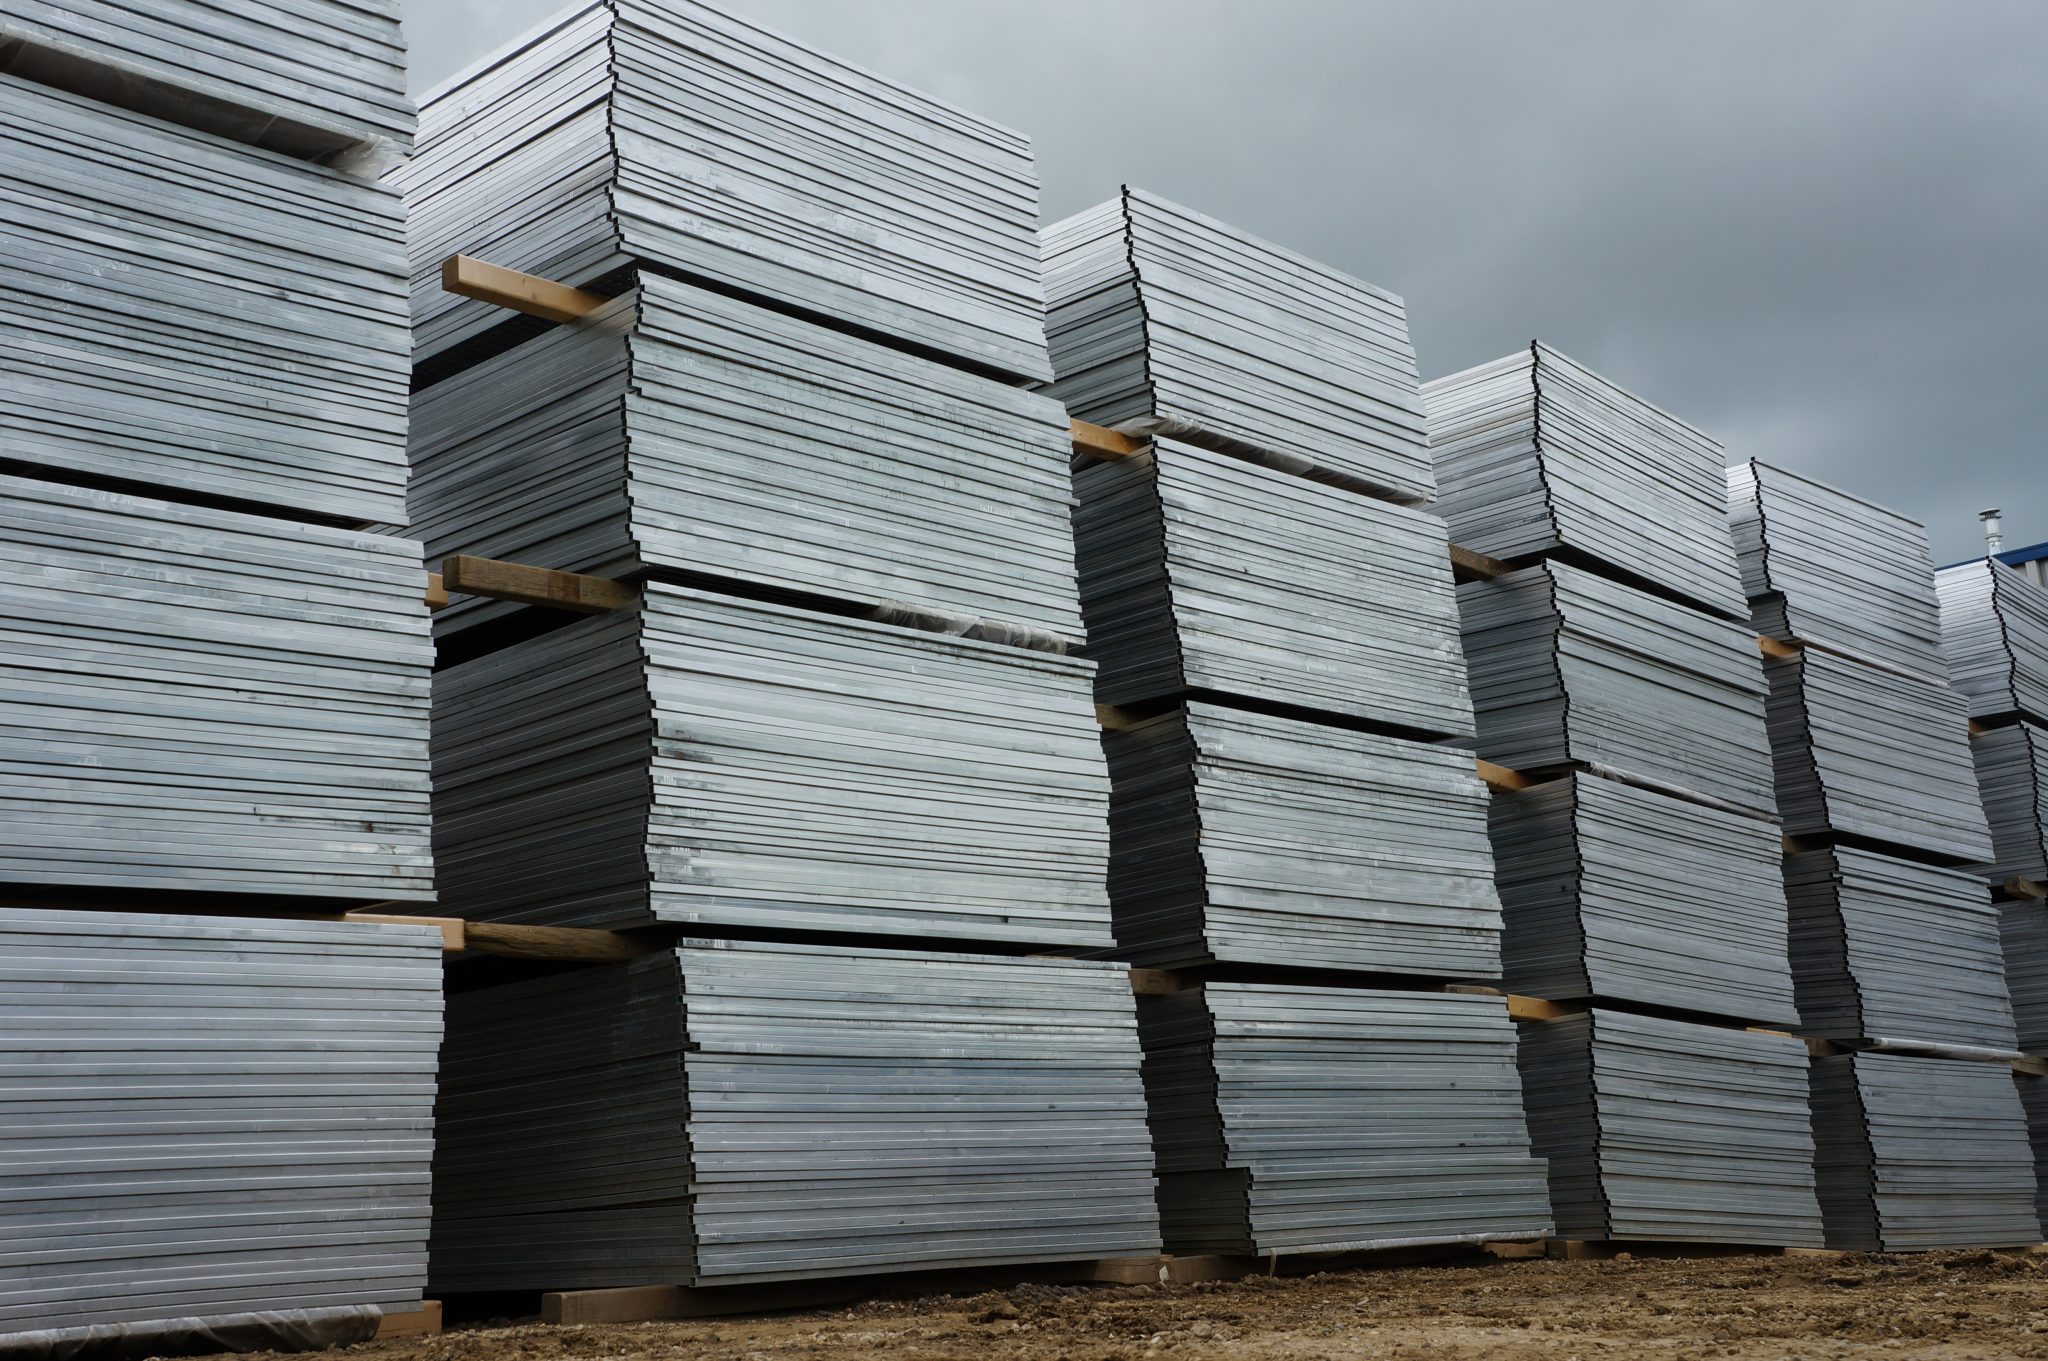 Stacks of temporary fence panels